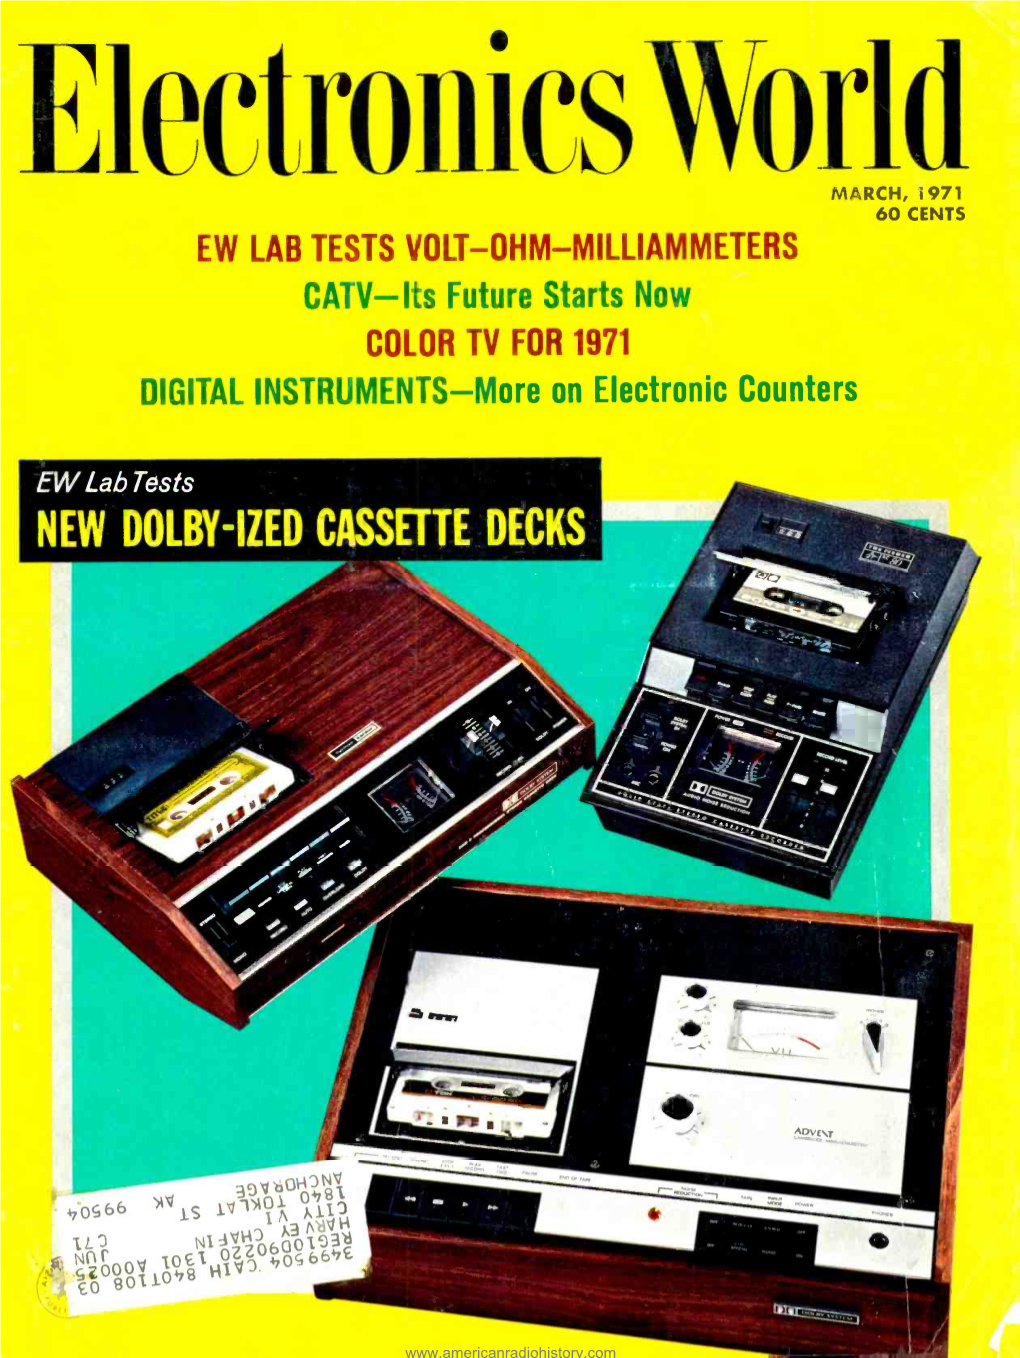 EW LAB TESTS VOLT -OHM -MILLIAMMETERS CATV -Its Future Starts Now COLOR TV for 1971 DIGITAL INSTRUMENTS -More on Electronic Counters